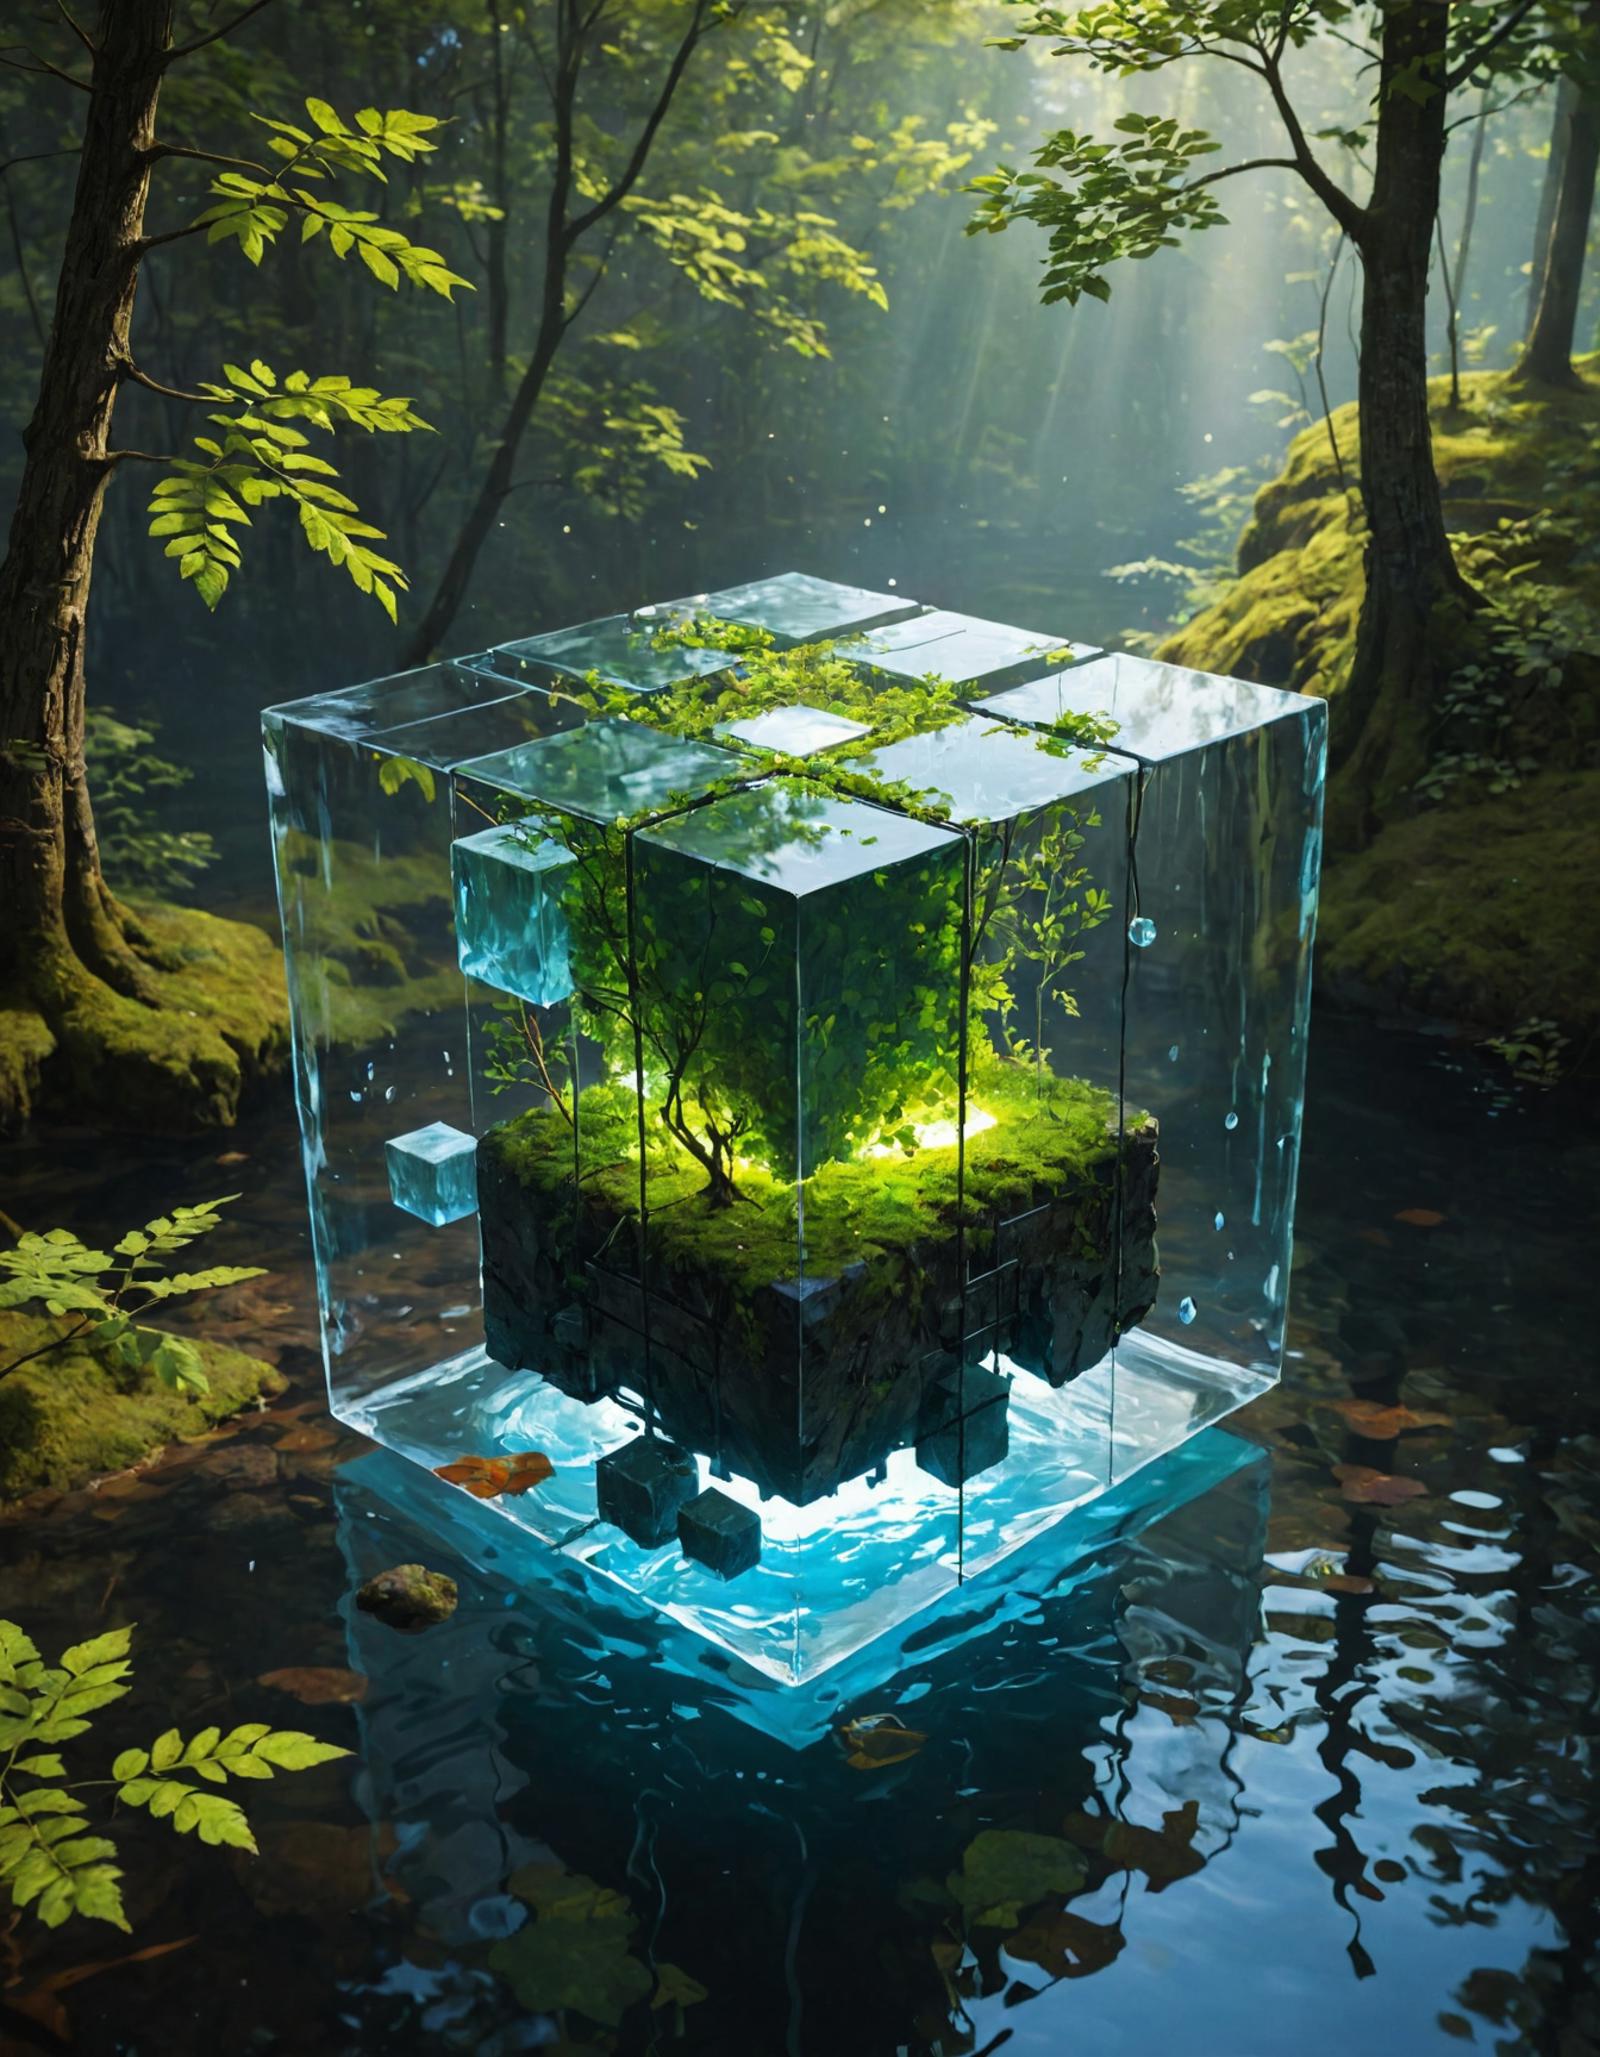 An Artistic Glass Cube with Plants and Water Inside.